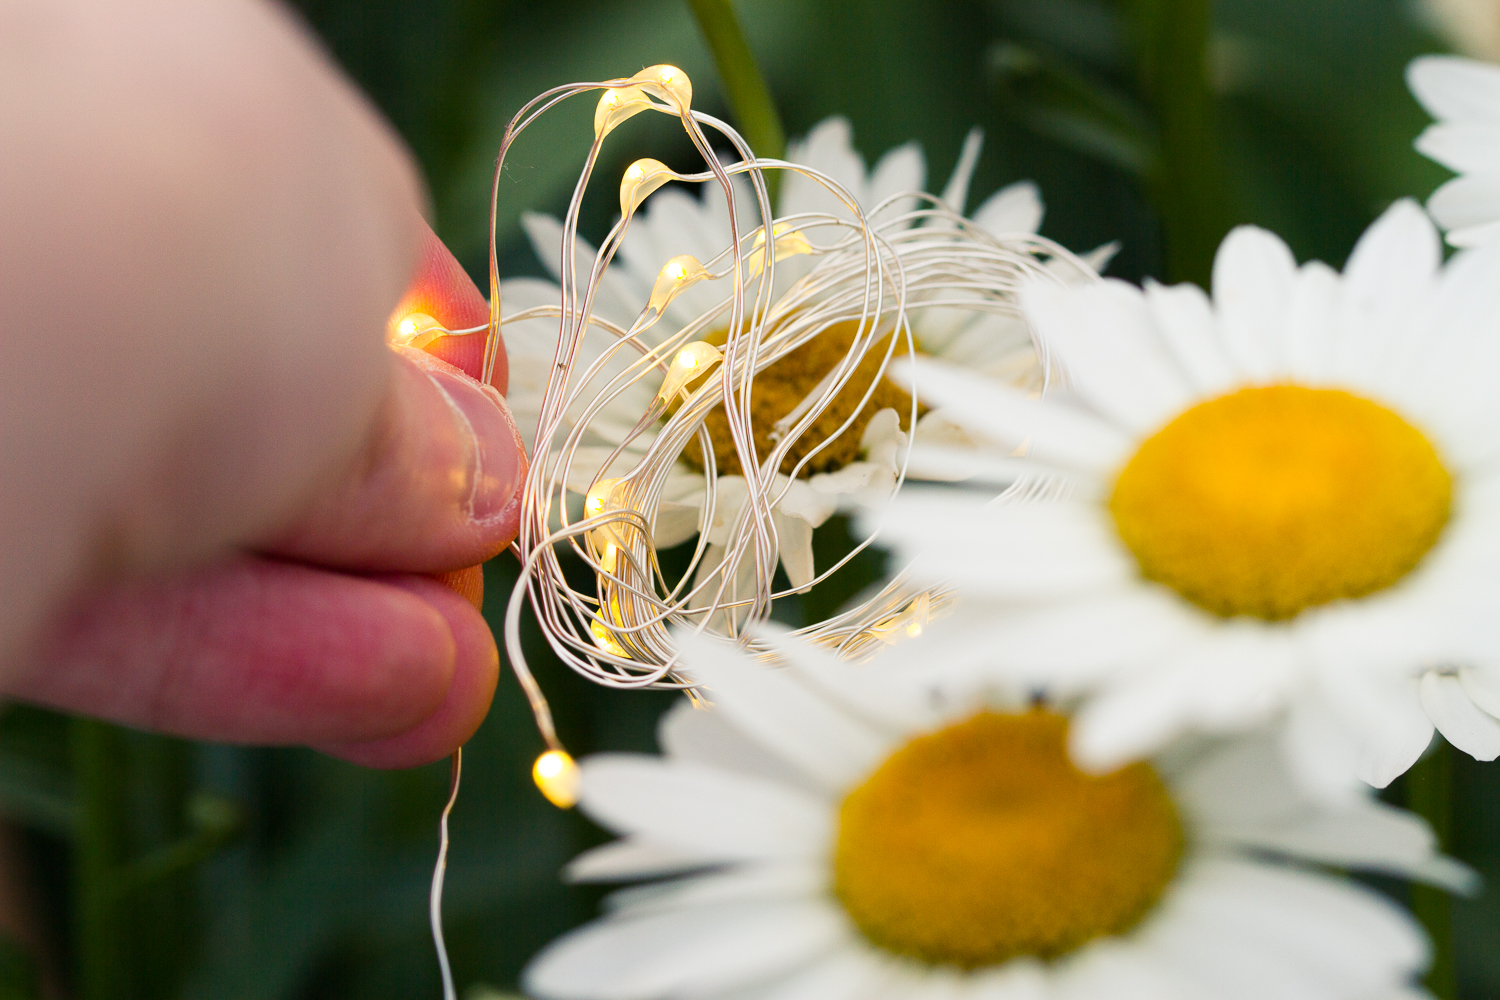 Image: Holding the lights in behind the daisy.